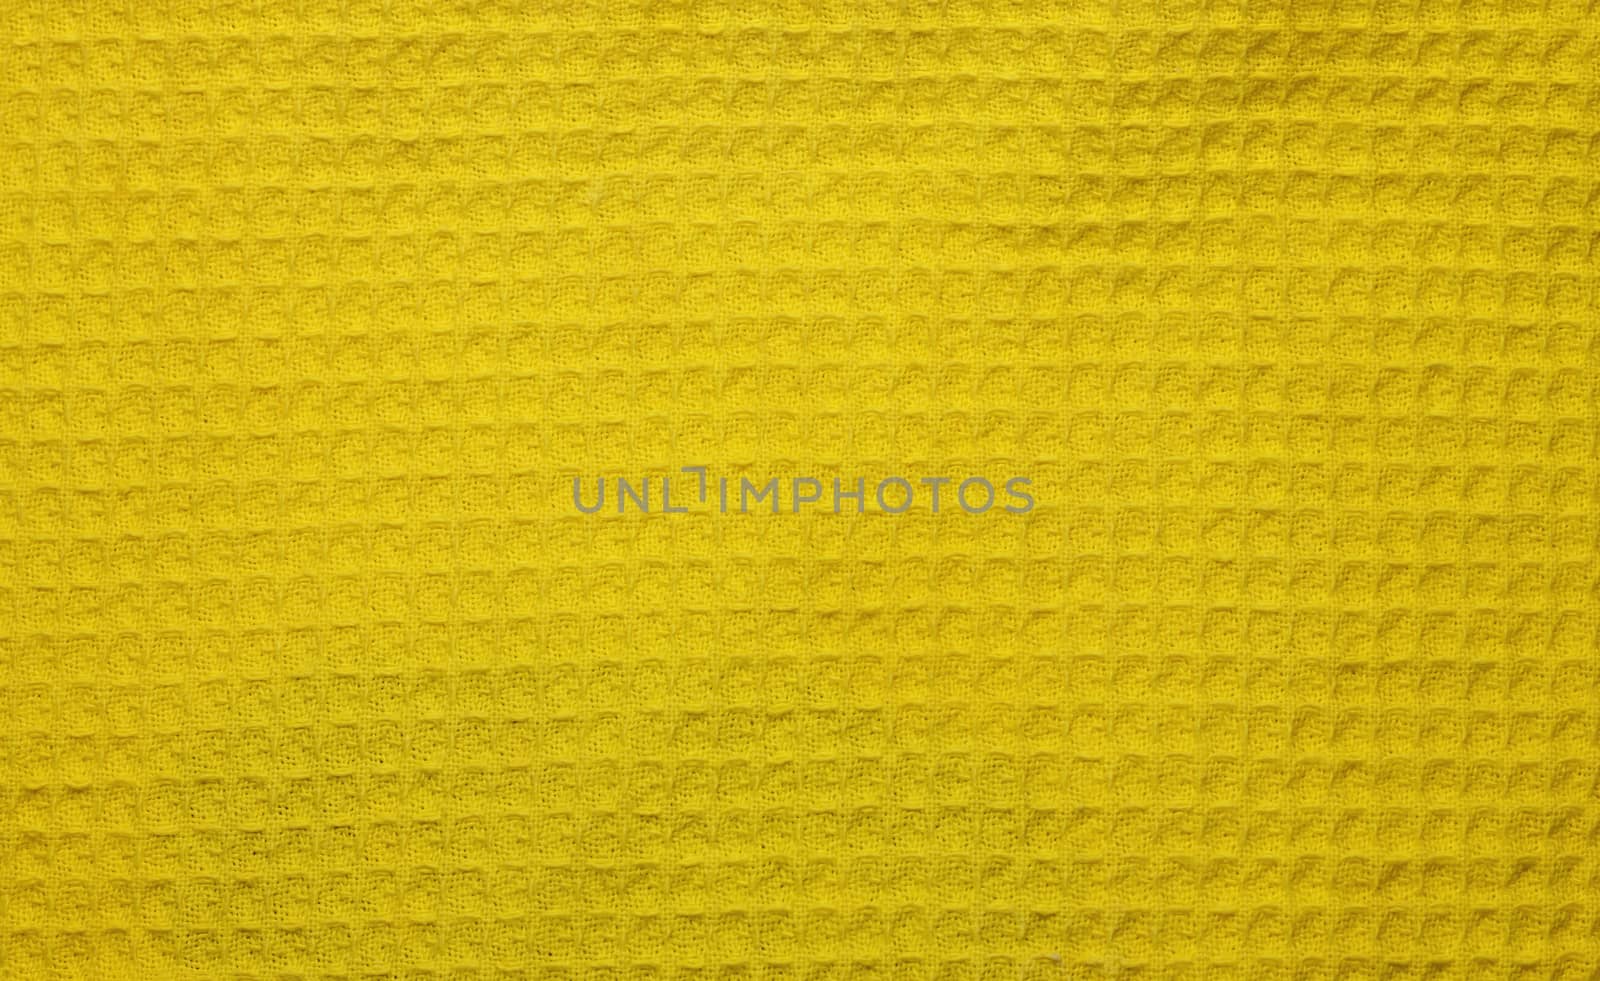 waffle cotton fabric texture background yellow abstract background, textured cloth towels